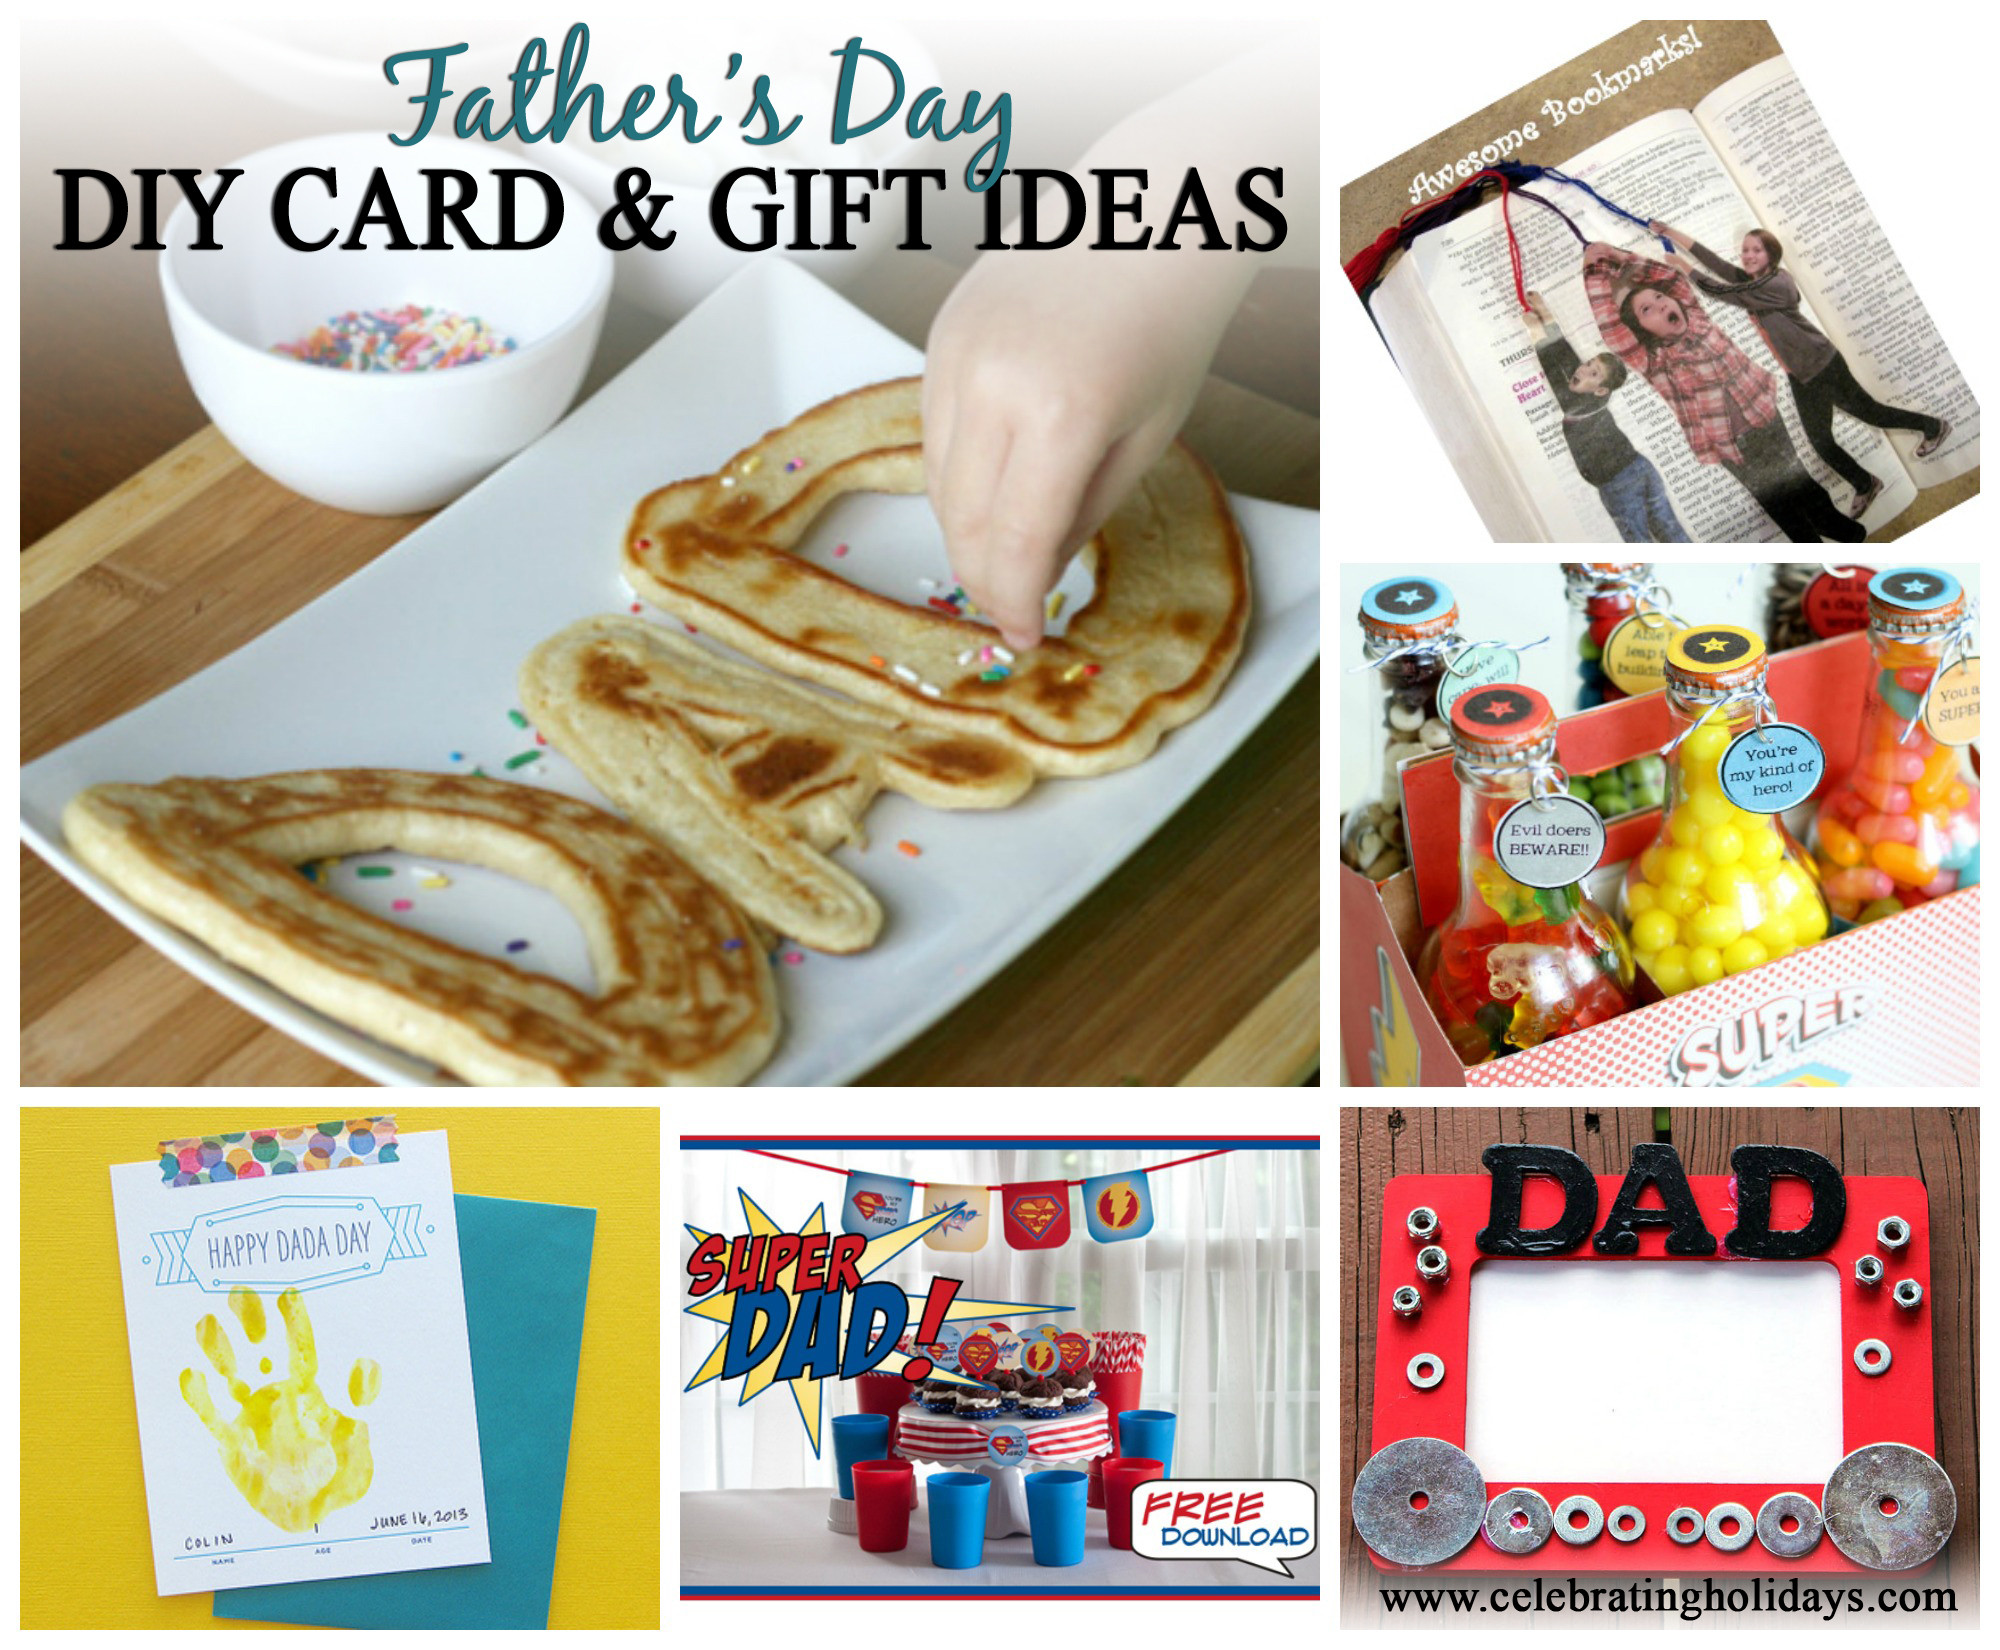 Father'S Day Photo Gift Ideas
 Father’s Day Card and Gift Ideas